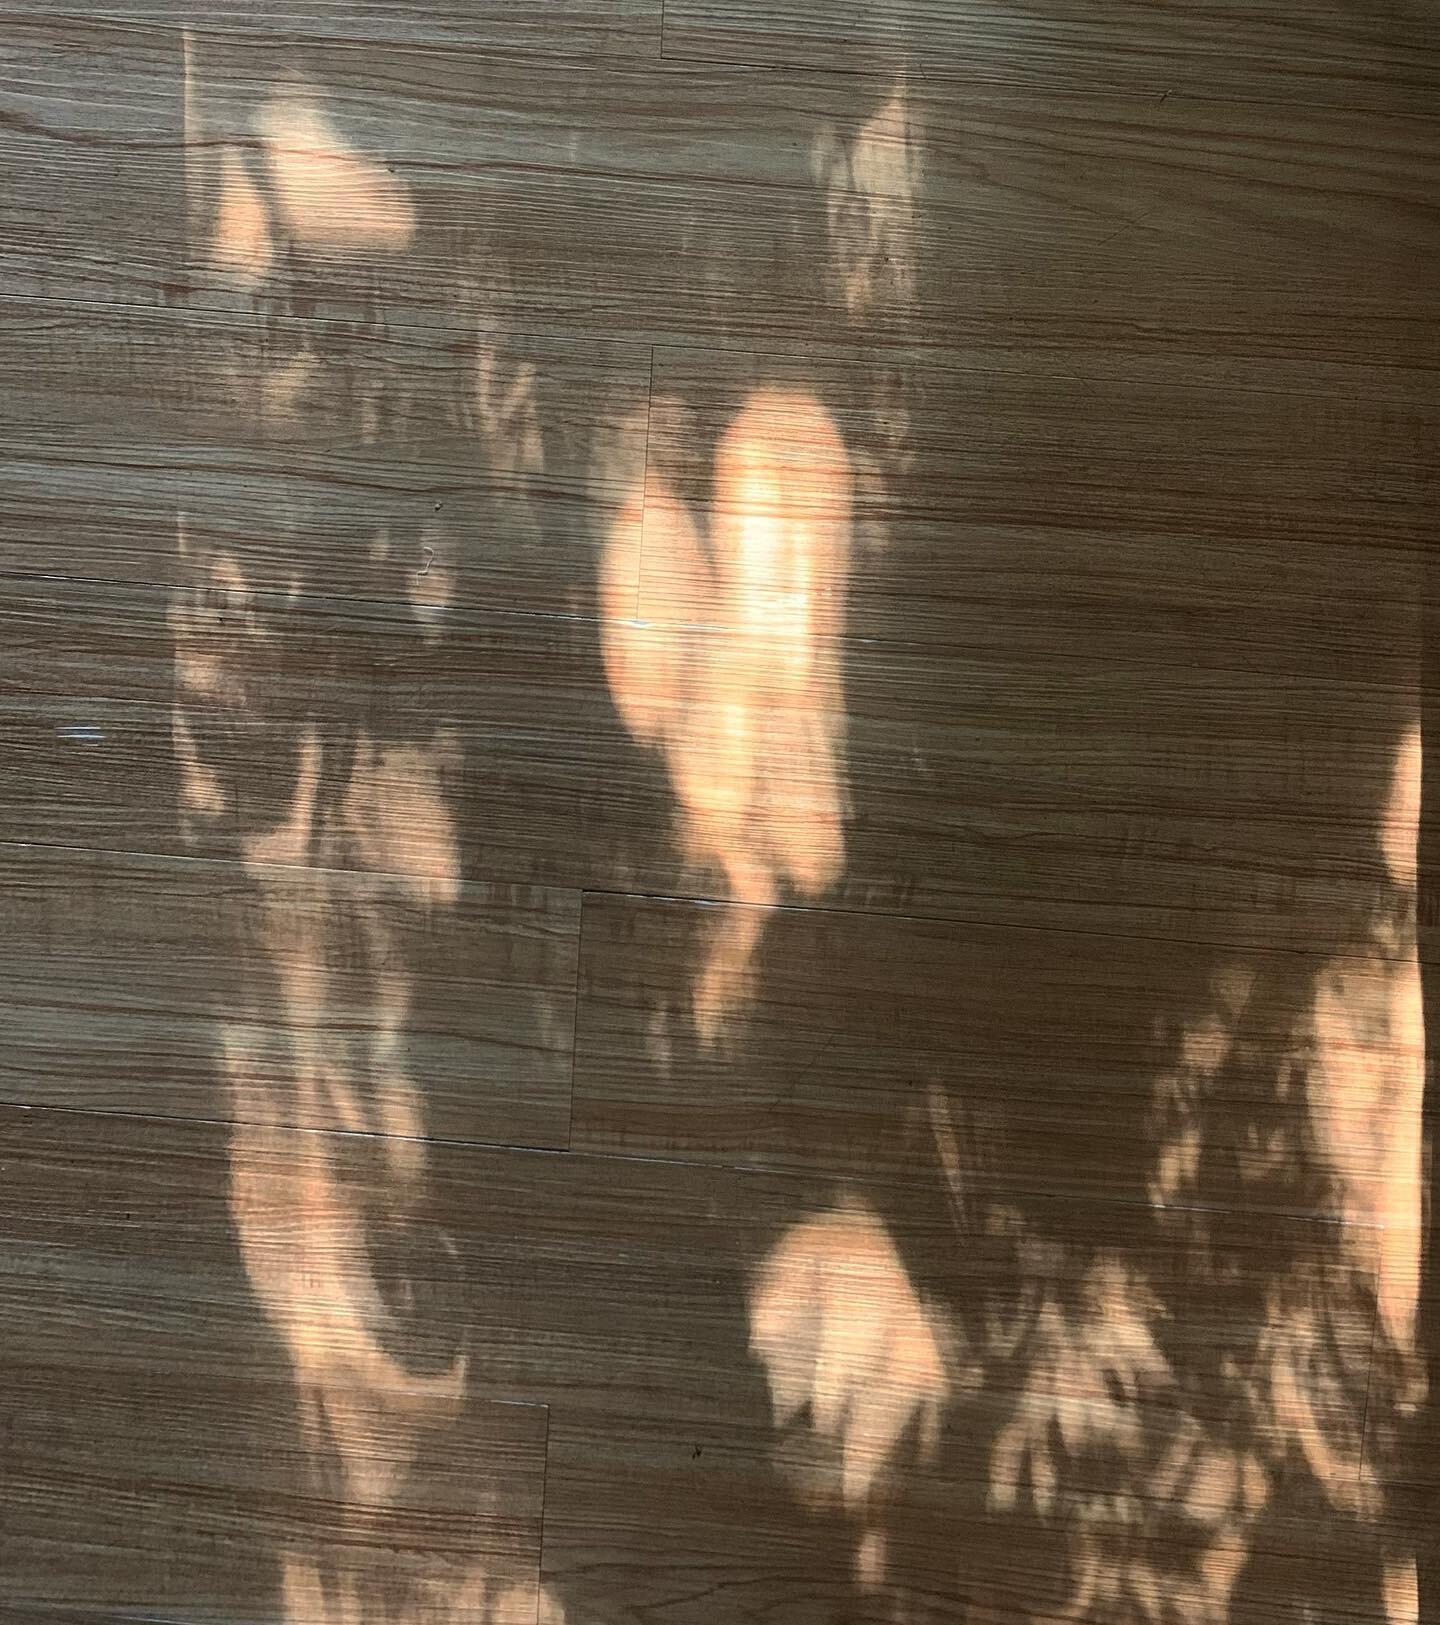 There is something about noticing the little details. I love how light and shadow can make it&rsquo;s own artwork.

I captured this heart I found in sunlight reflections after a cranio session with @fluid_dynamics_craniosacral.  After a session that 